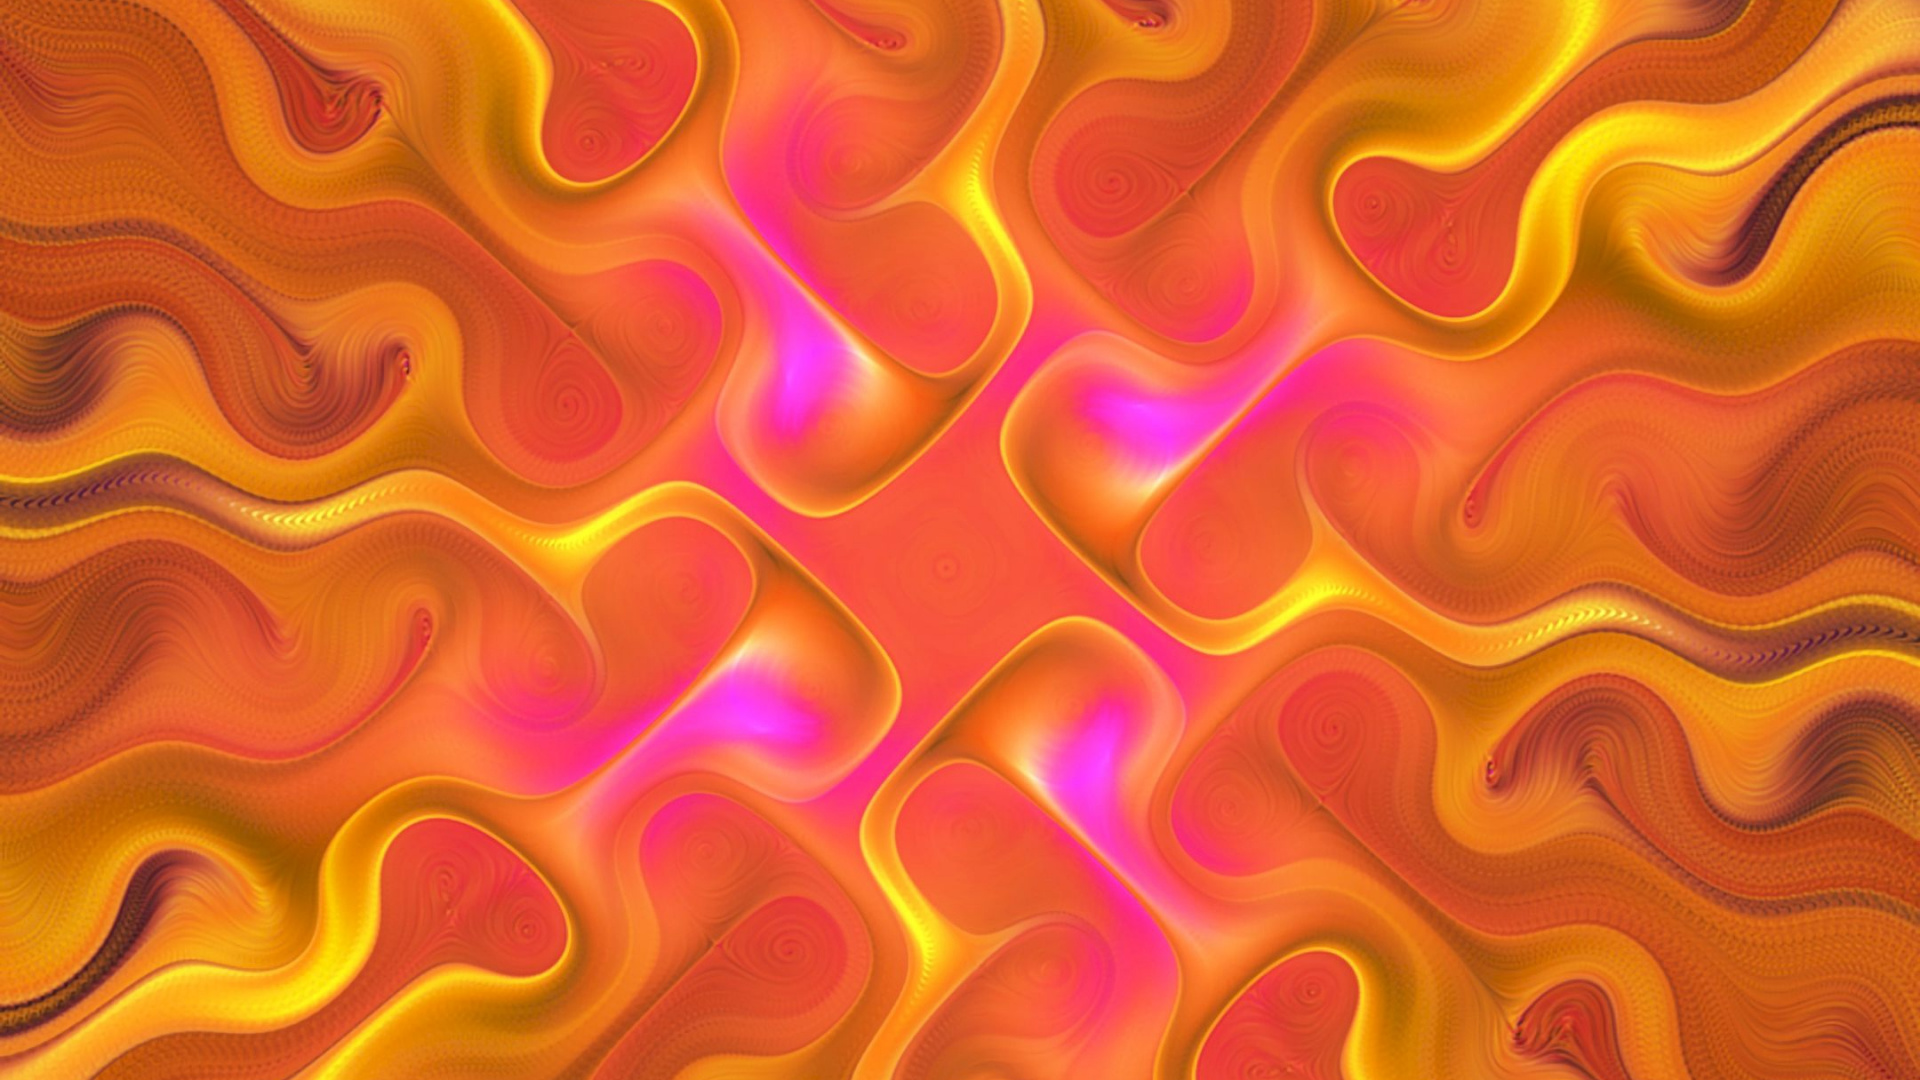 Orange and Yellow Abstract Painting. Wallpaper in 1920x1080 Resolution